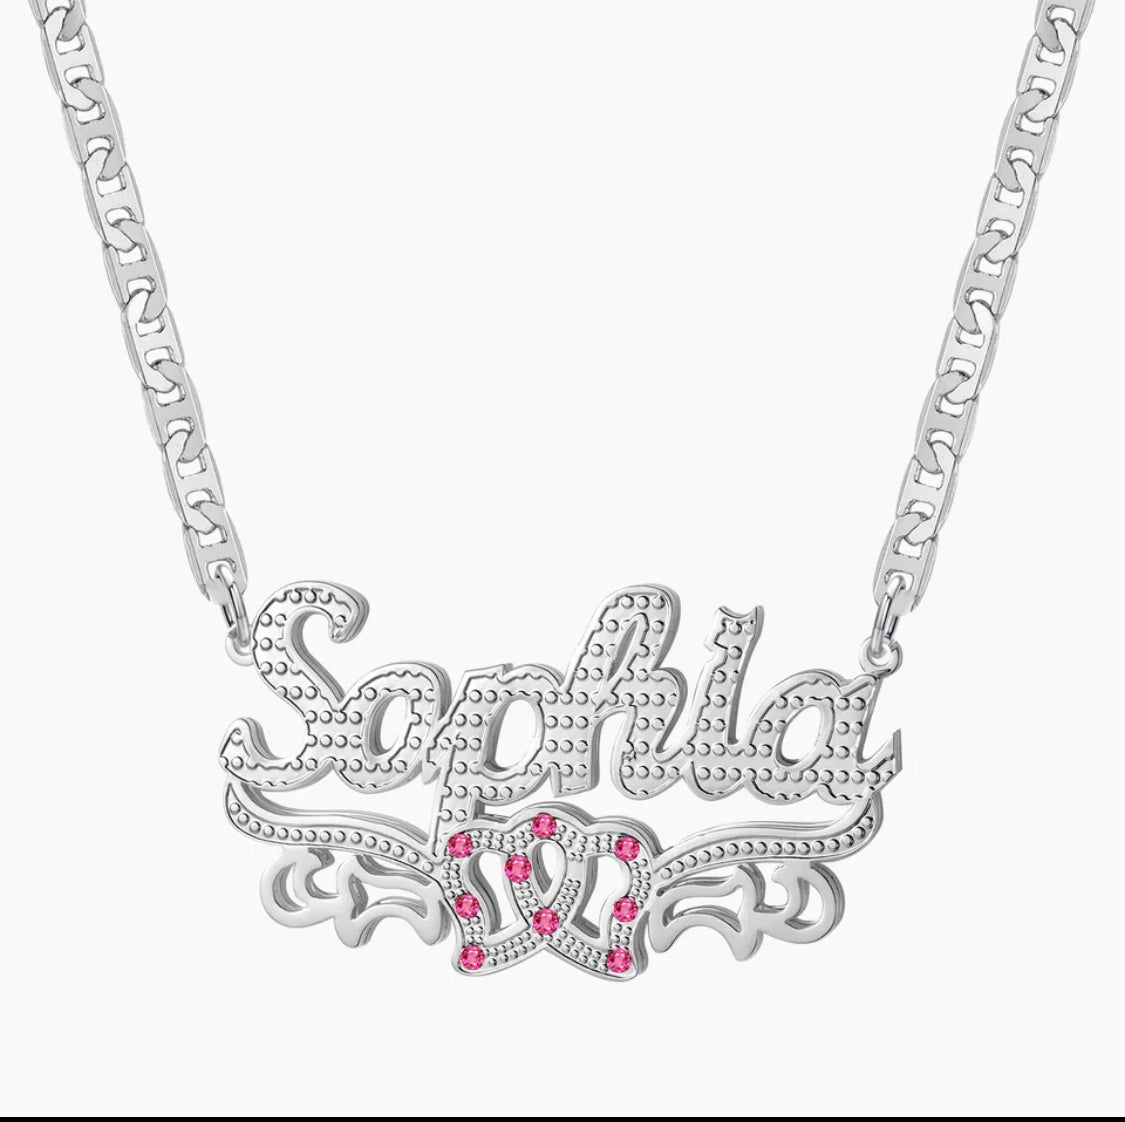 The Pink Double Necklace